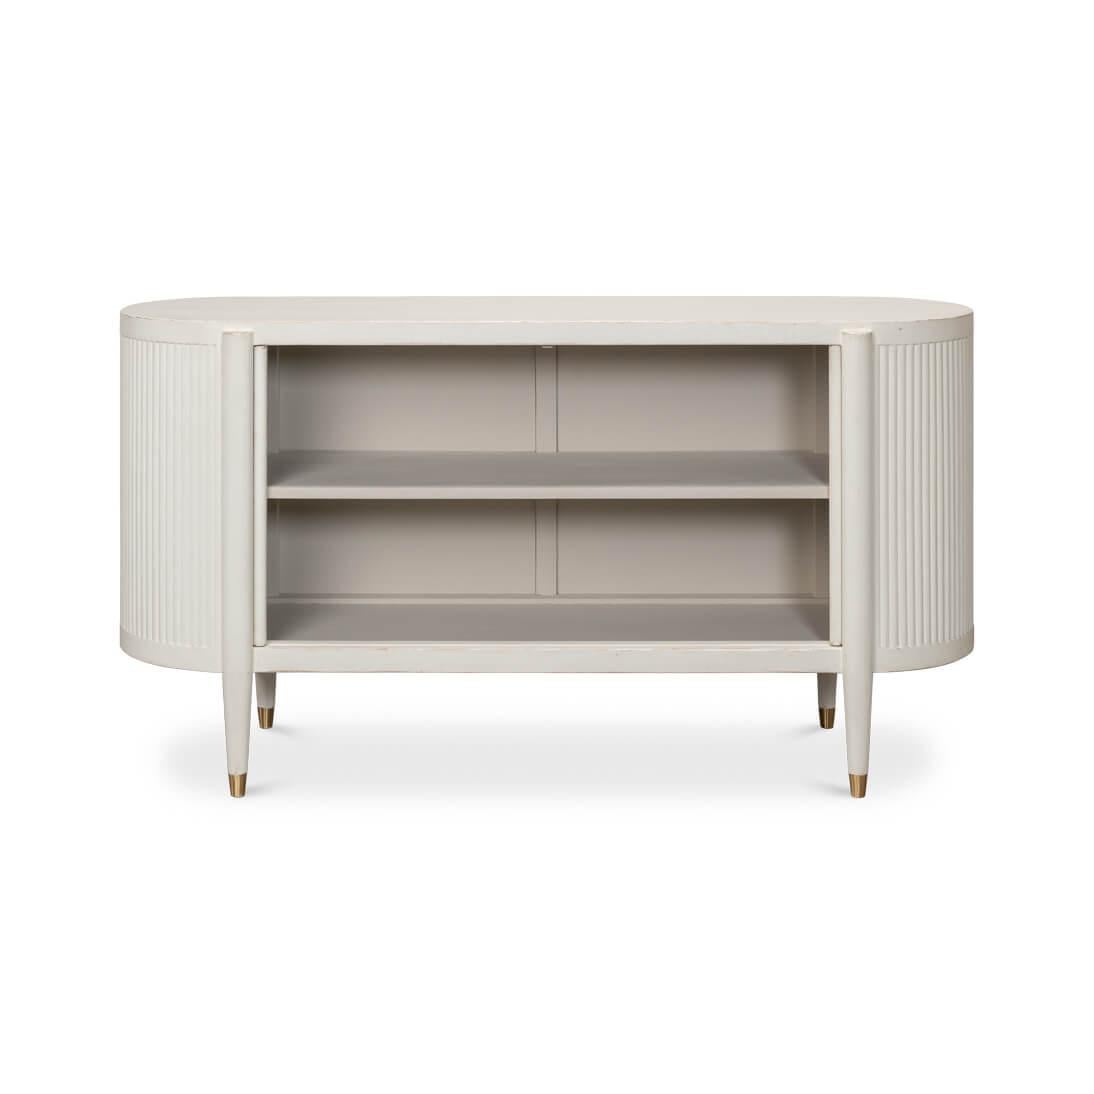 Mid-Century Modern Antique White Fluted Sideboard For Sale